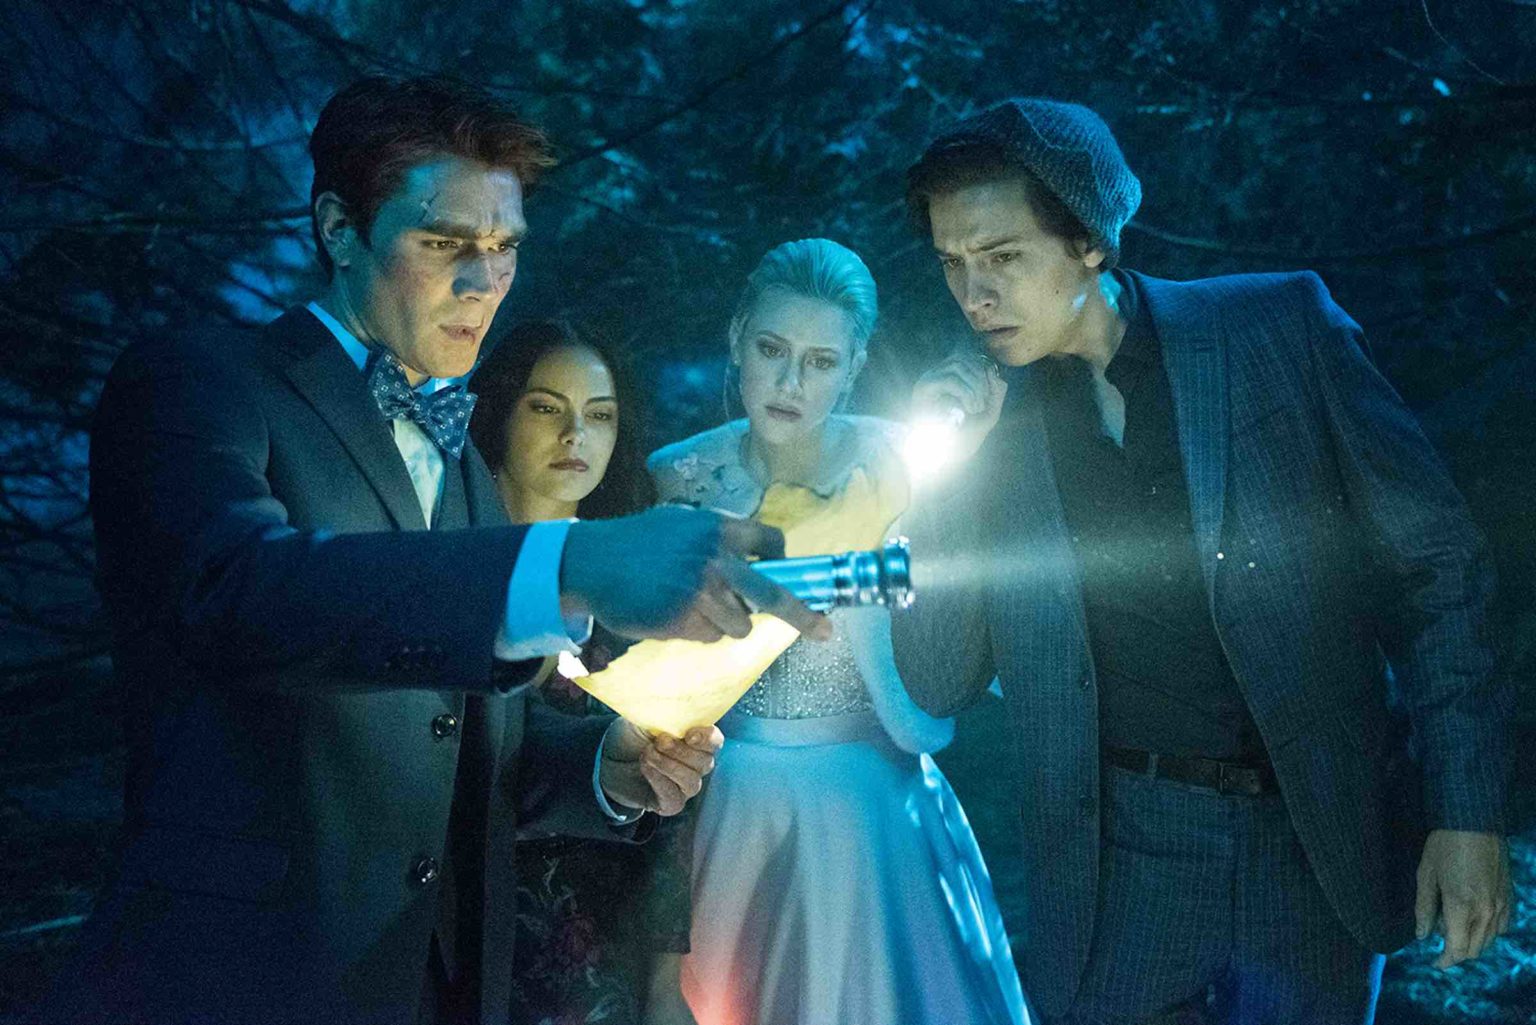 Let’s see how well you know 'Riverdale' season four up to “Chapter Sixty-Nine: Men of Honor”. Take our 'Riverdale' season four quiz now.